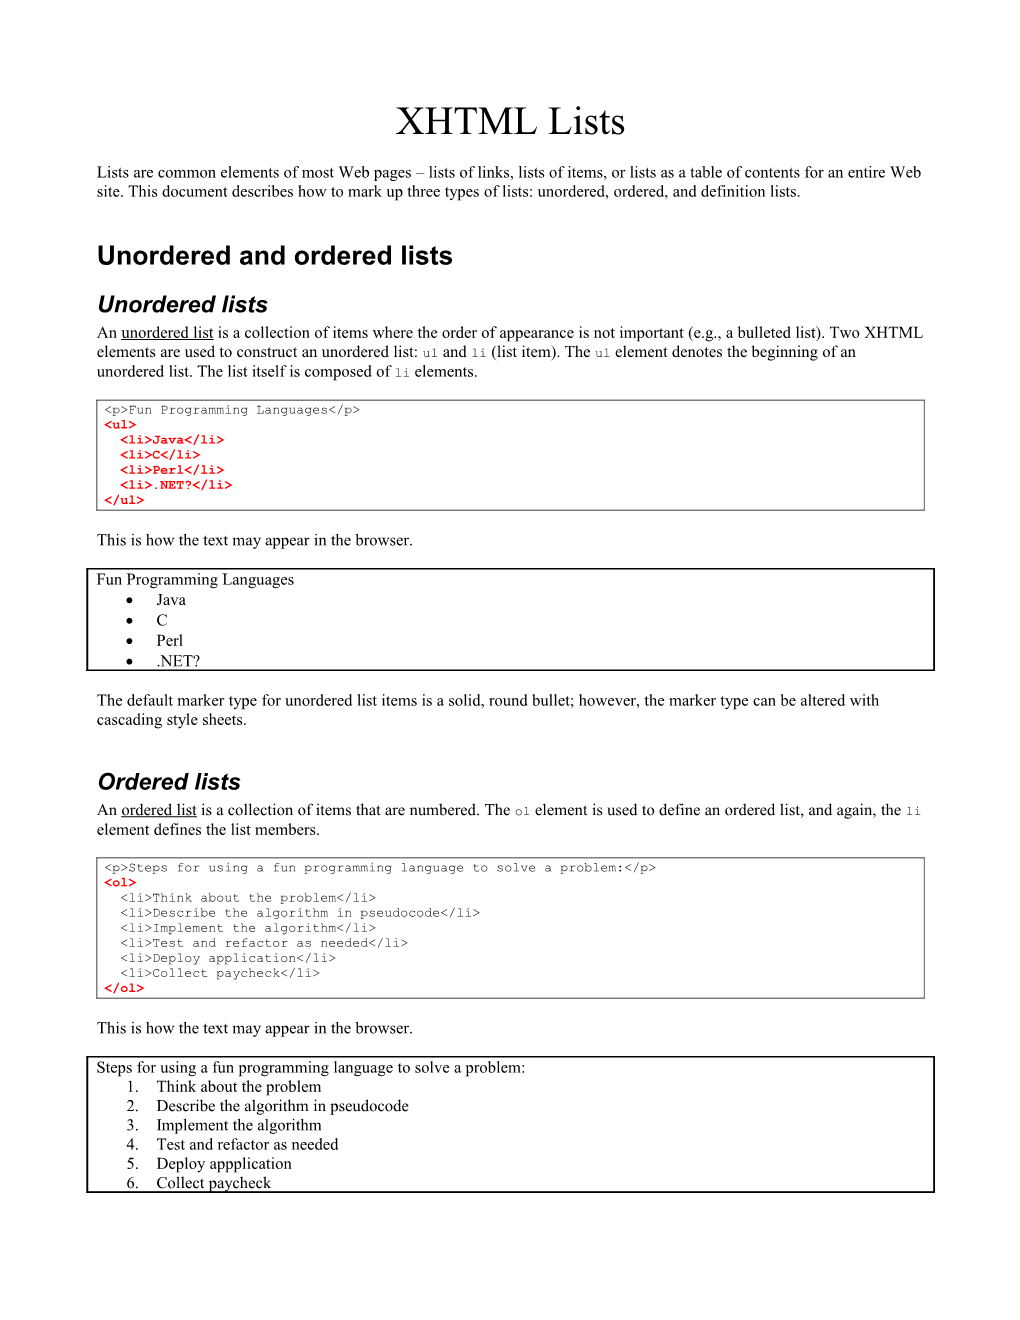 Unordered and Ordered Lists